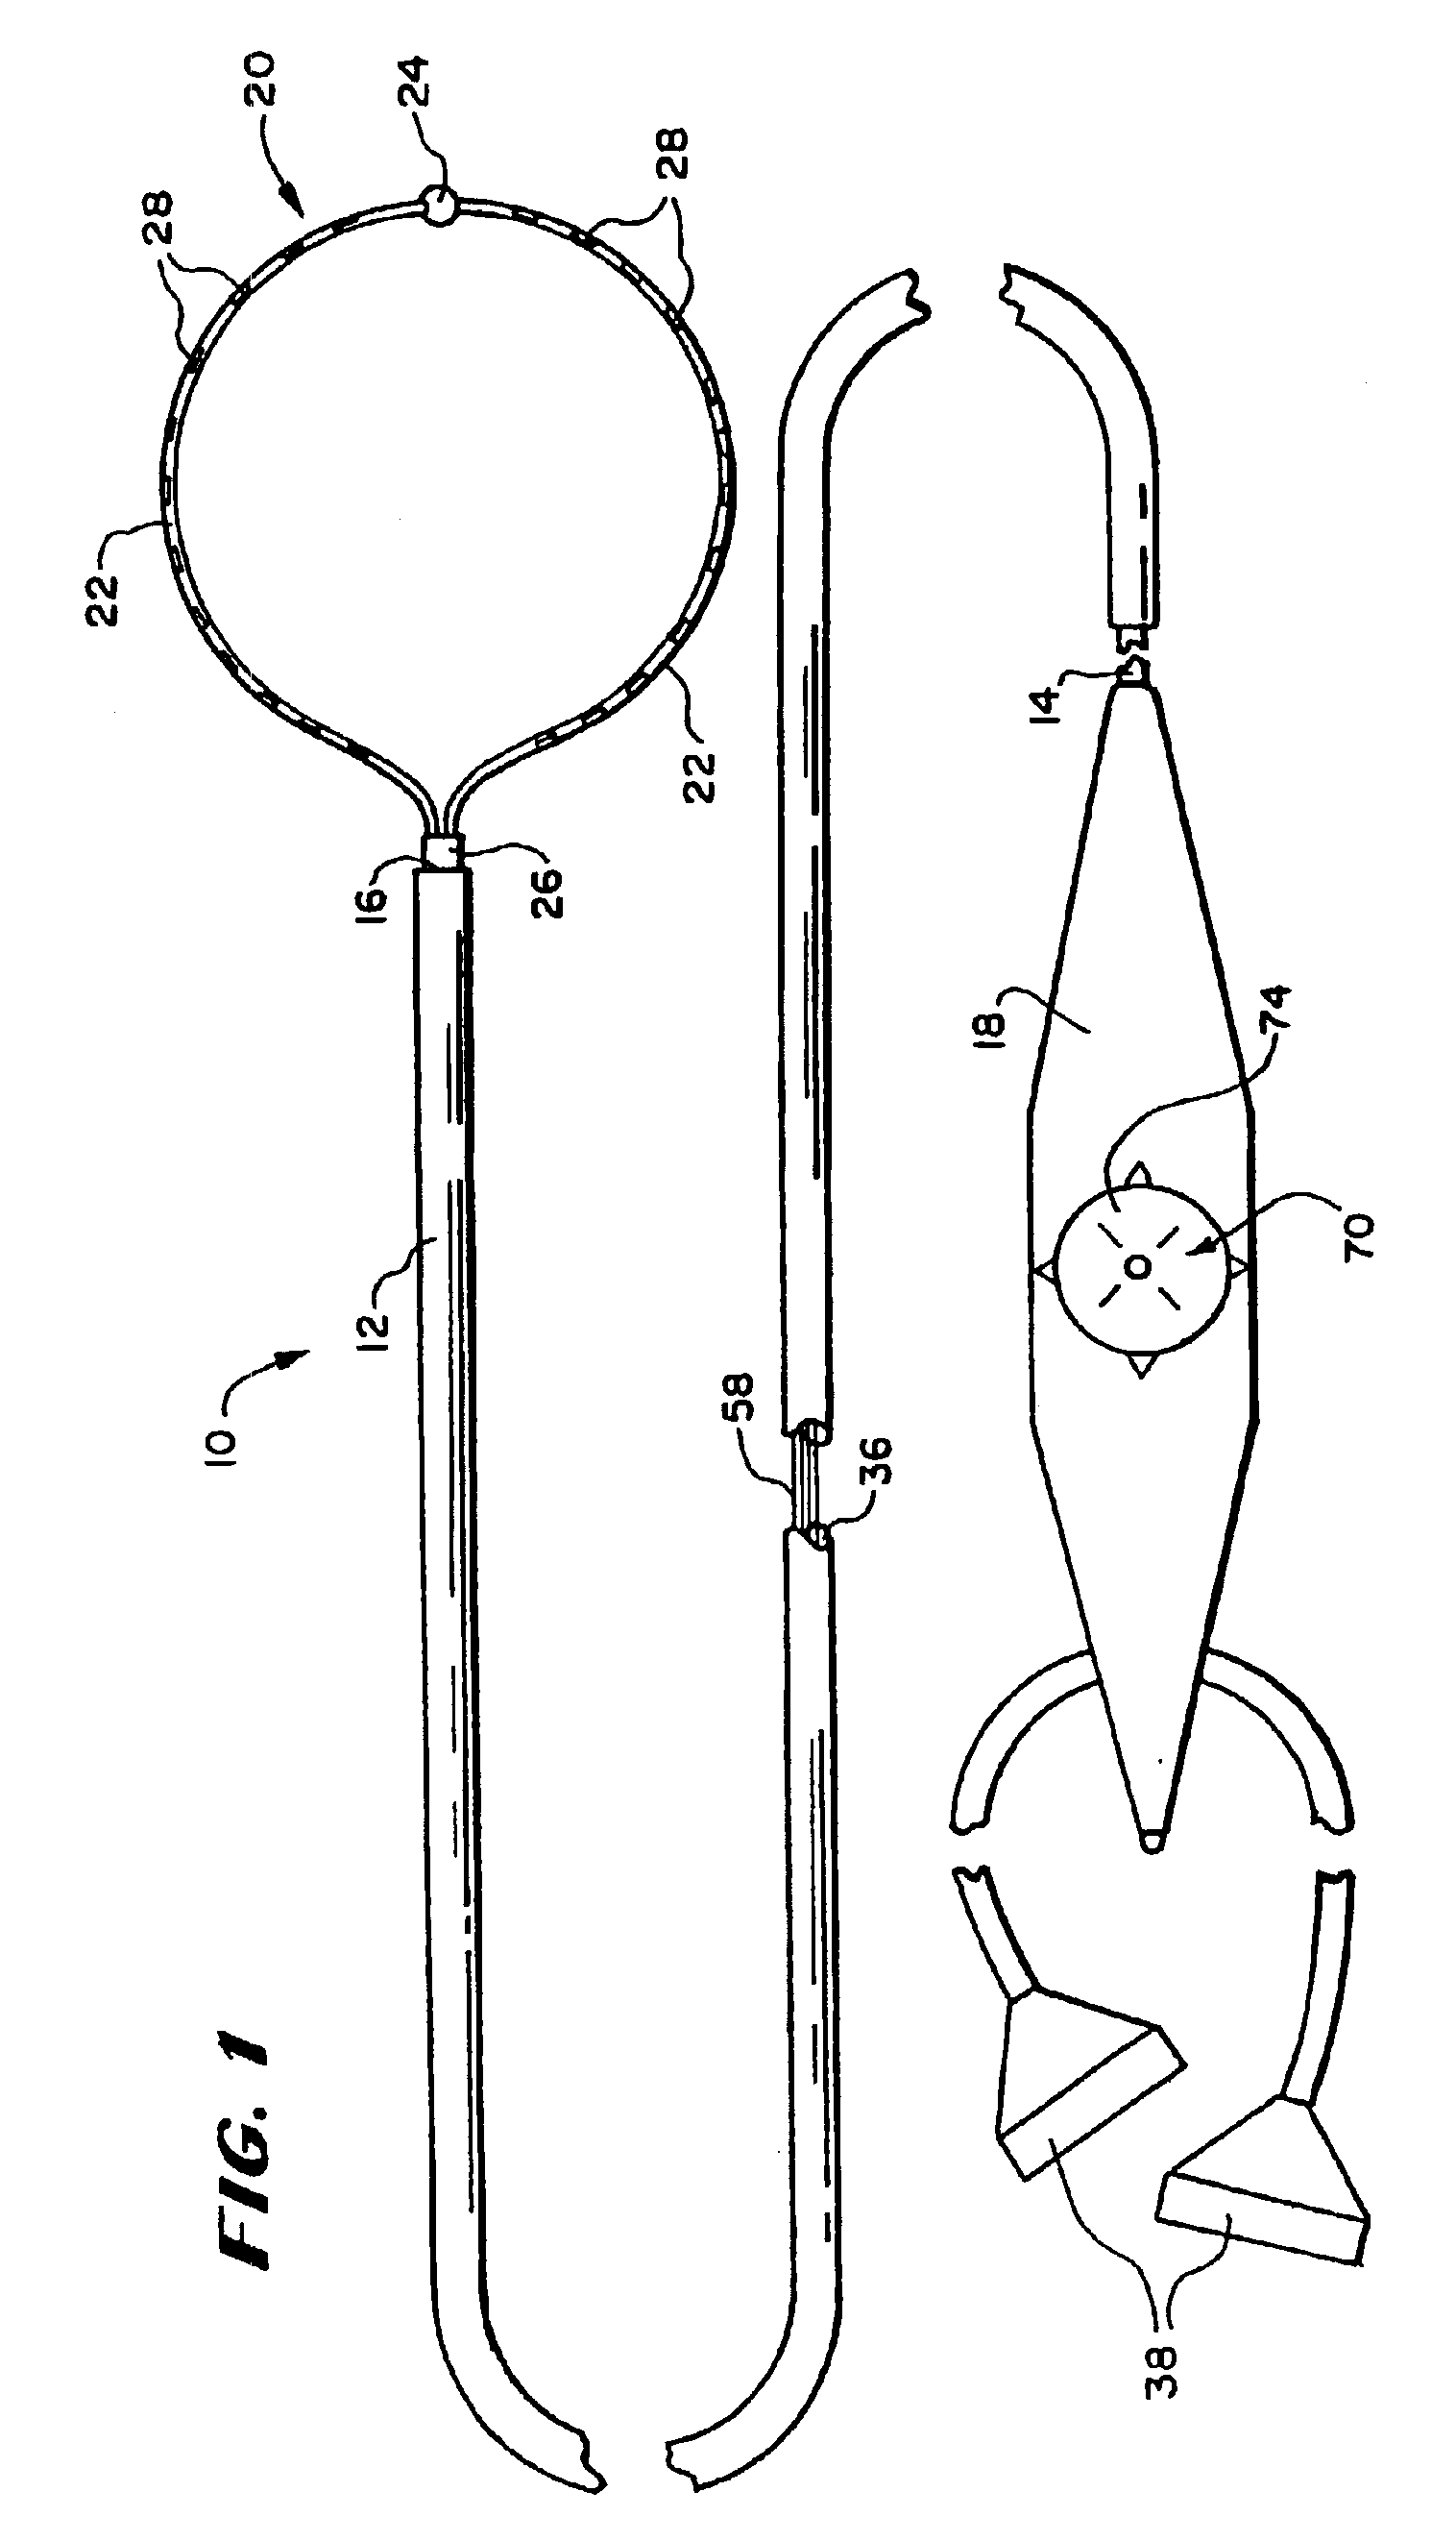 Structures and methods for deploying electrode elements